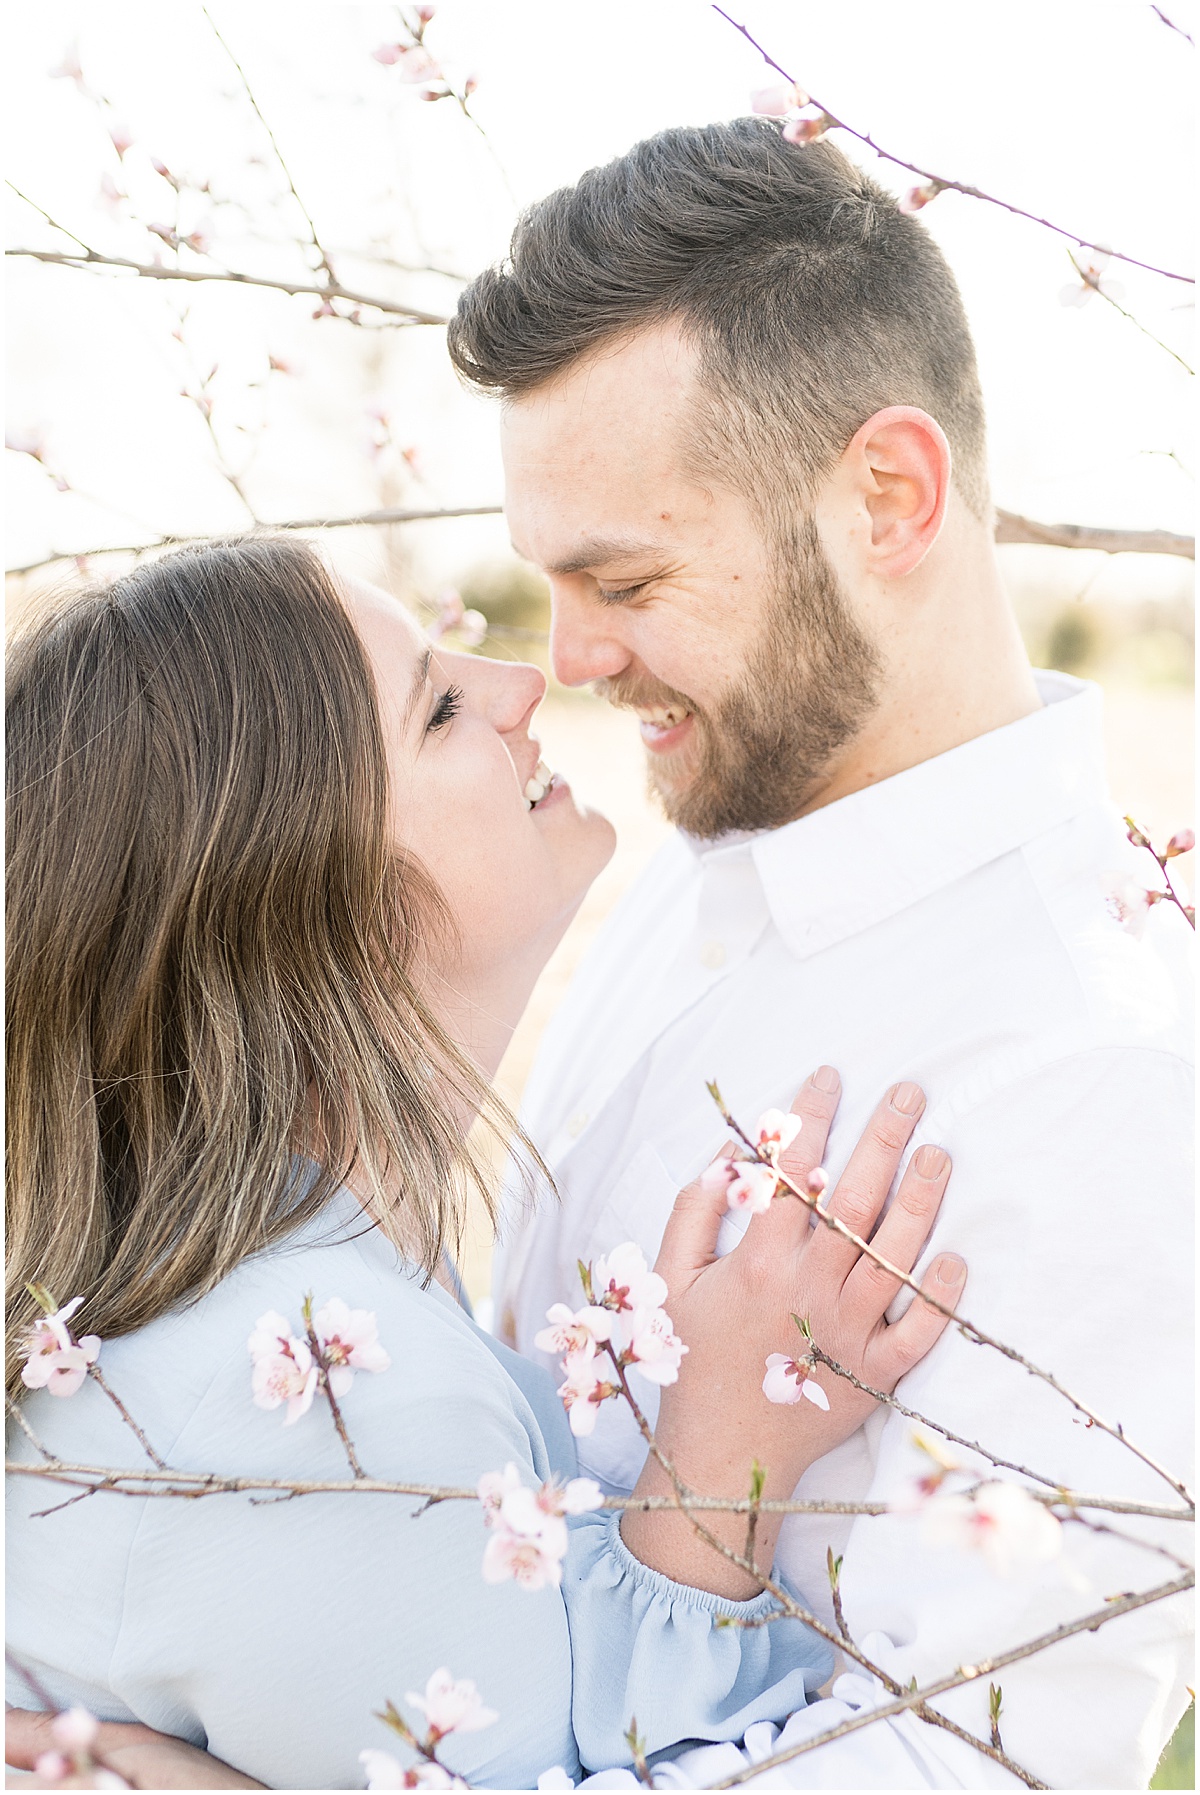 Country engagement photos in Lebanon, Indiana